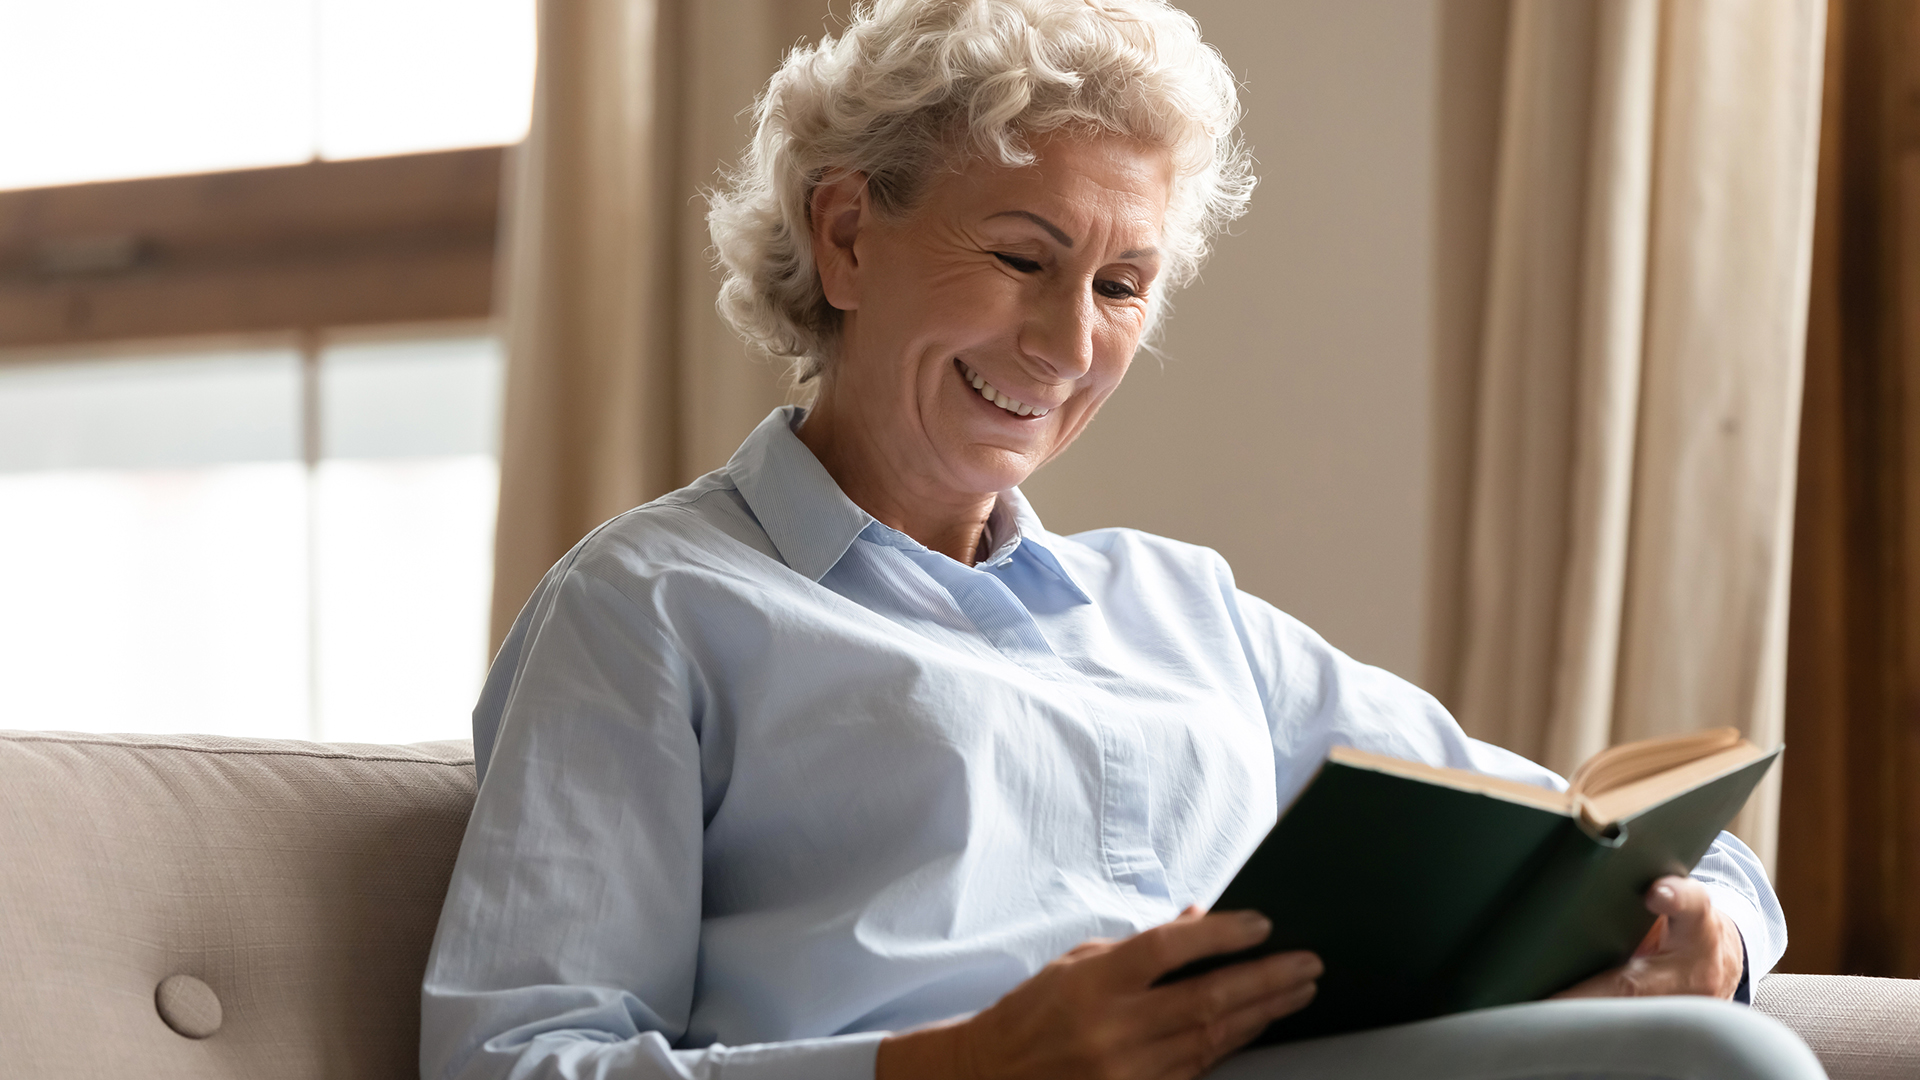 Smiling mature woman enjoy free time having good hobby pastime reading interesting literature holding book seated on comfy couch in living room at home alone